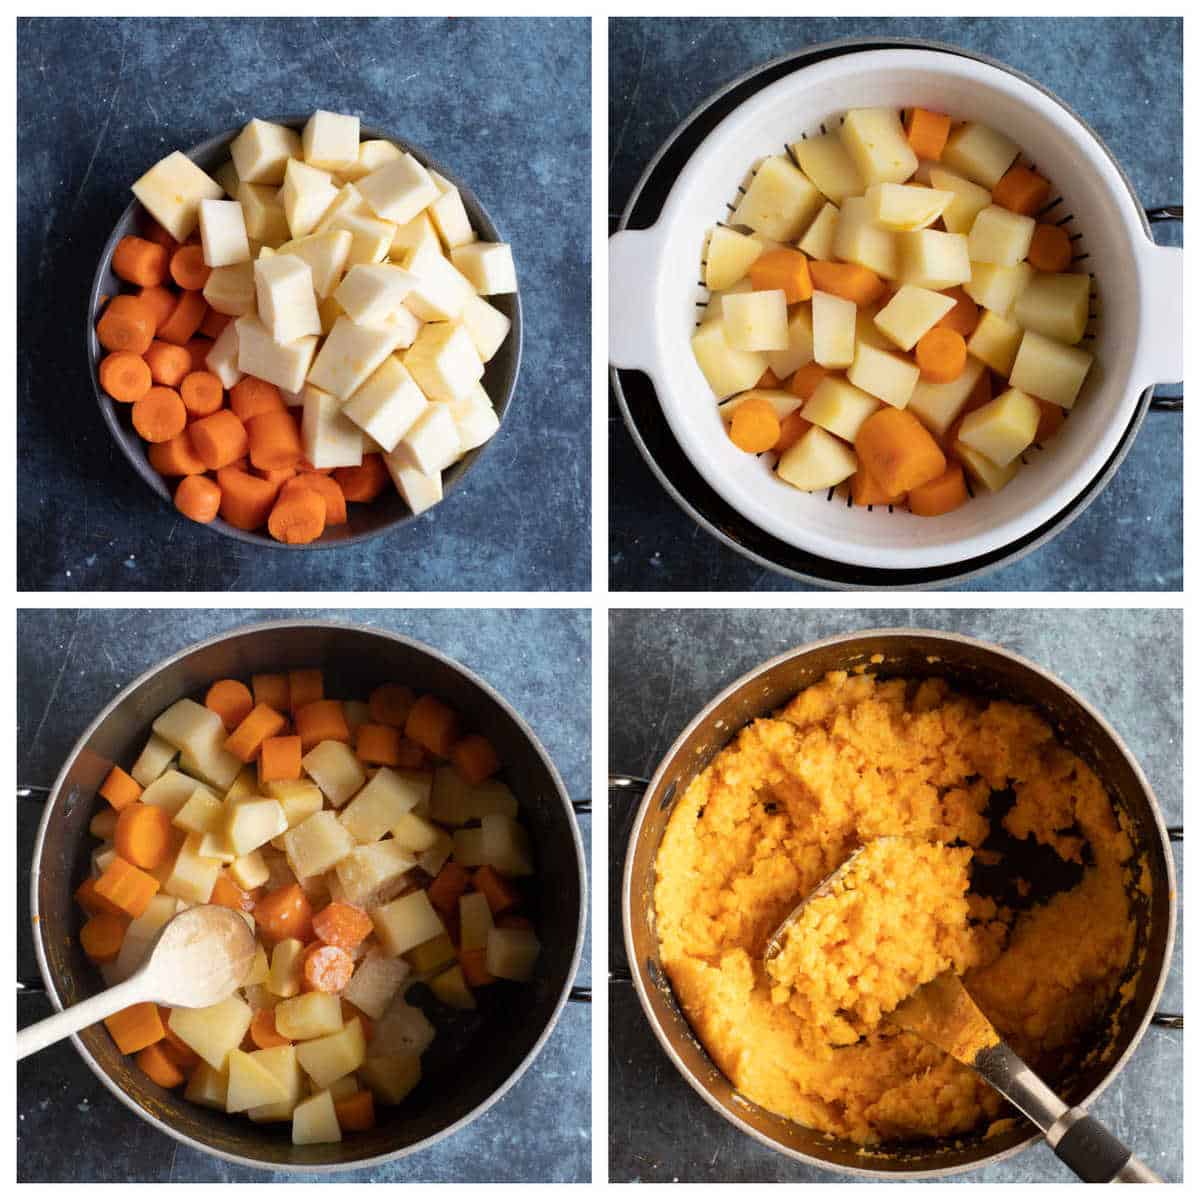 Step by step photo instructions for making swede and carrot mash.